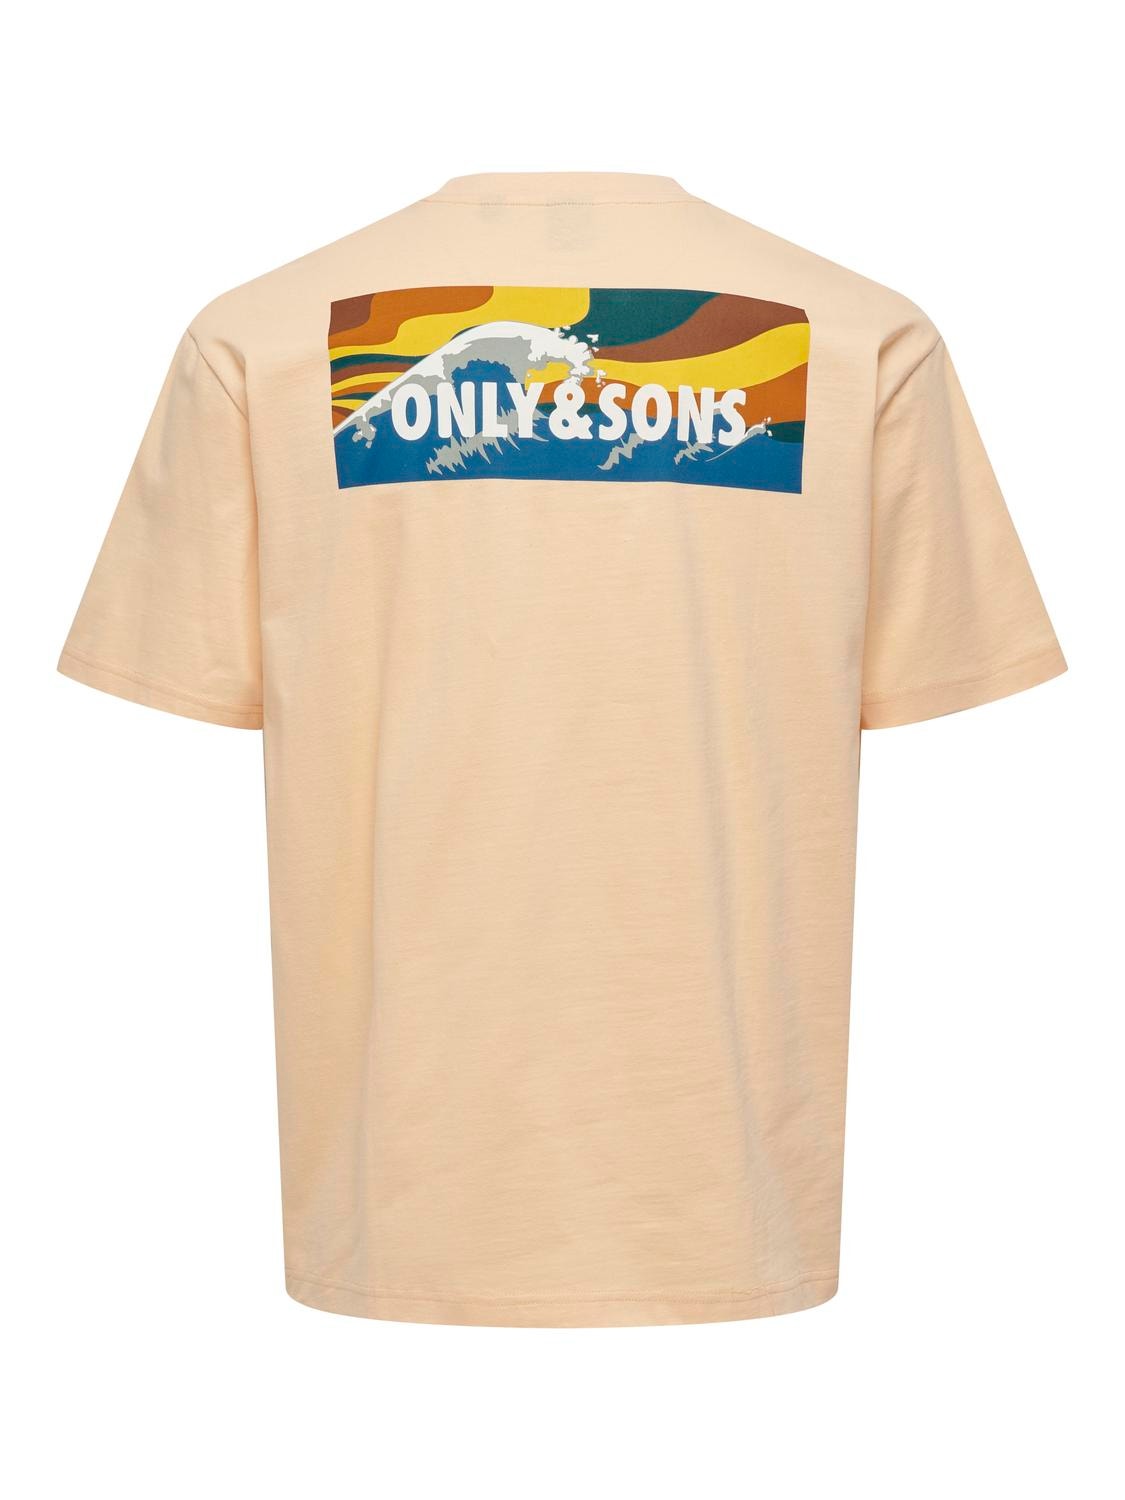 ONLY & SONS o-hals t-shirt -Creampuff - 22029091